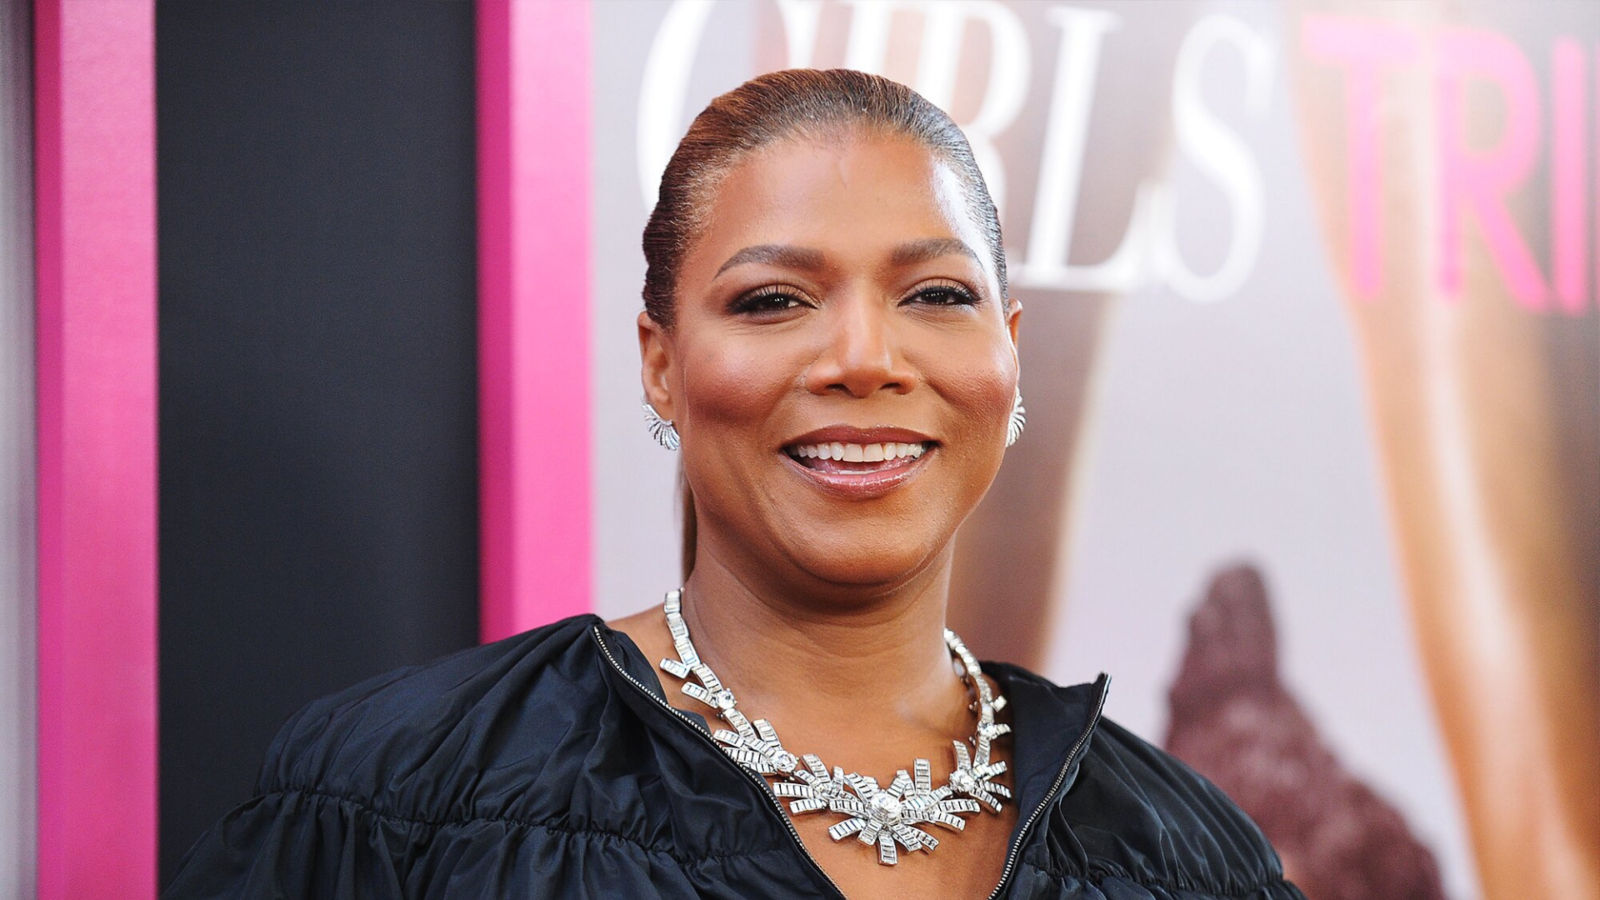 Queen Latifah ‘practices’ saying no to jobs that don’t align with her health goals